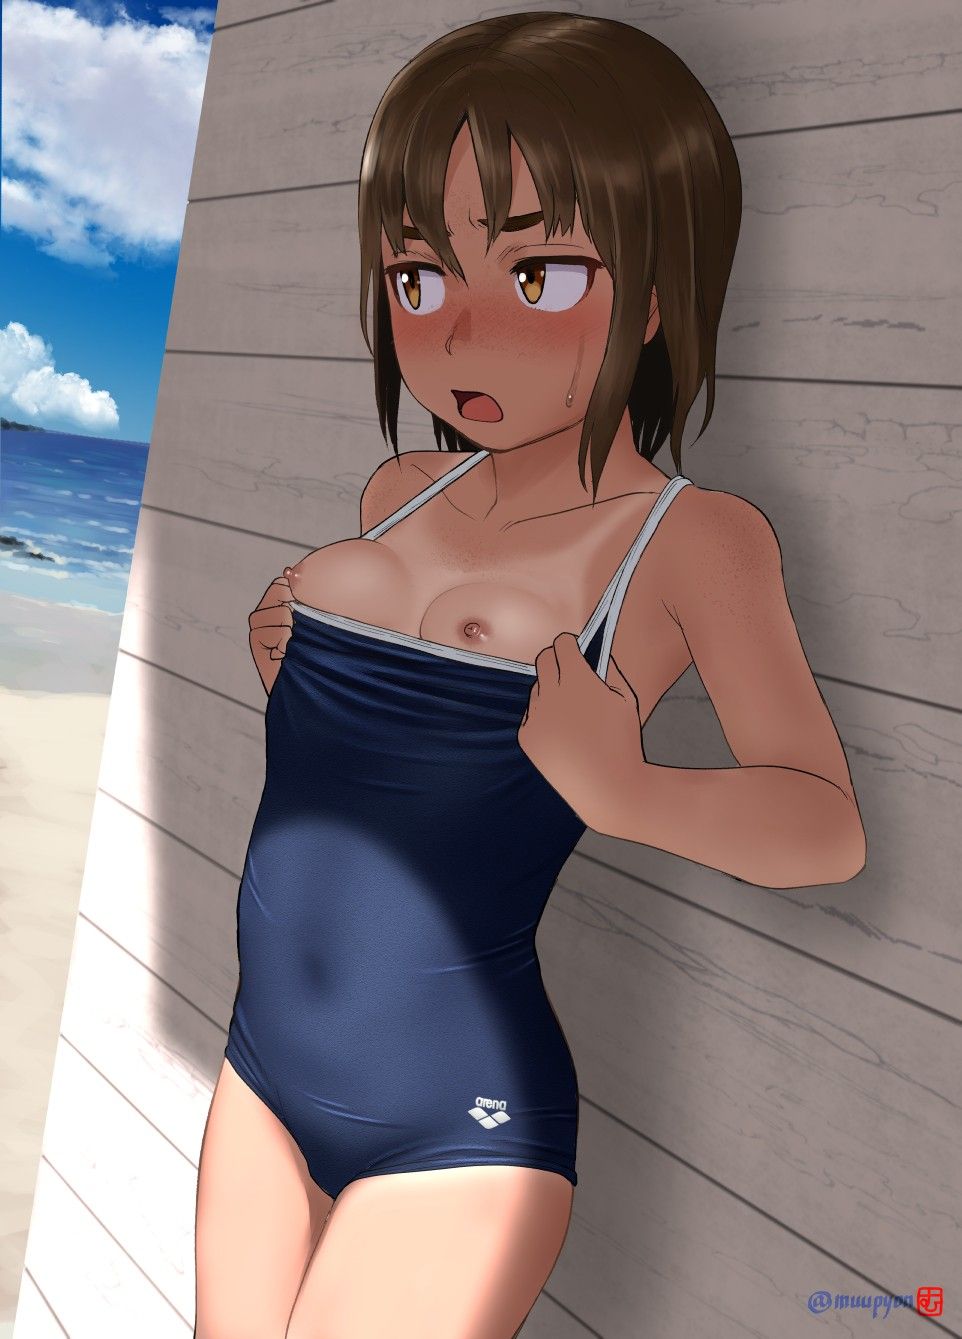 【2nd】Erotic image of a girl with a sunburn after Part 17 14